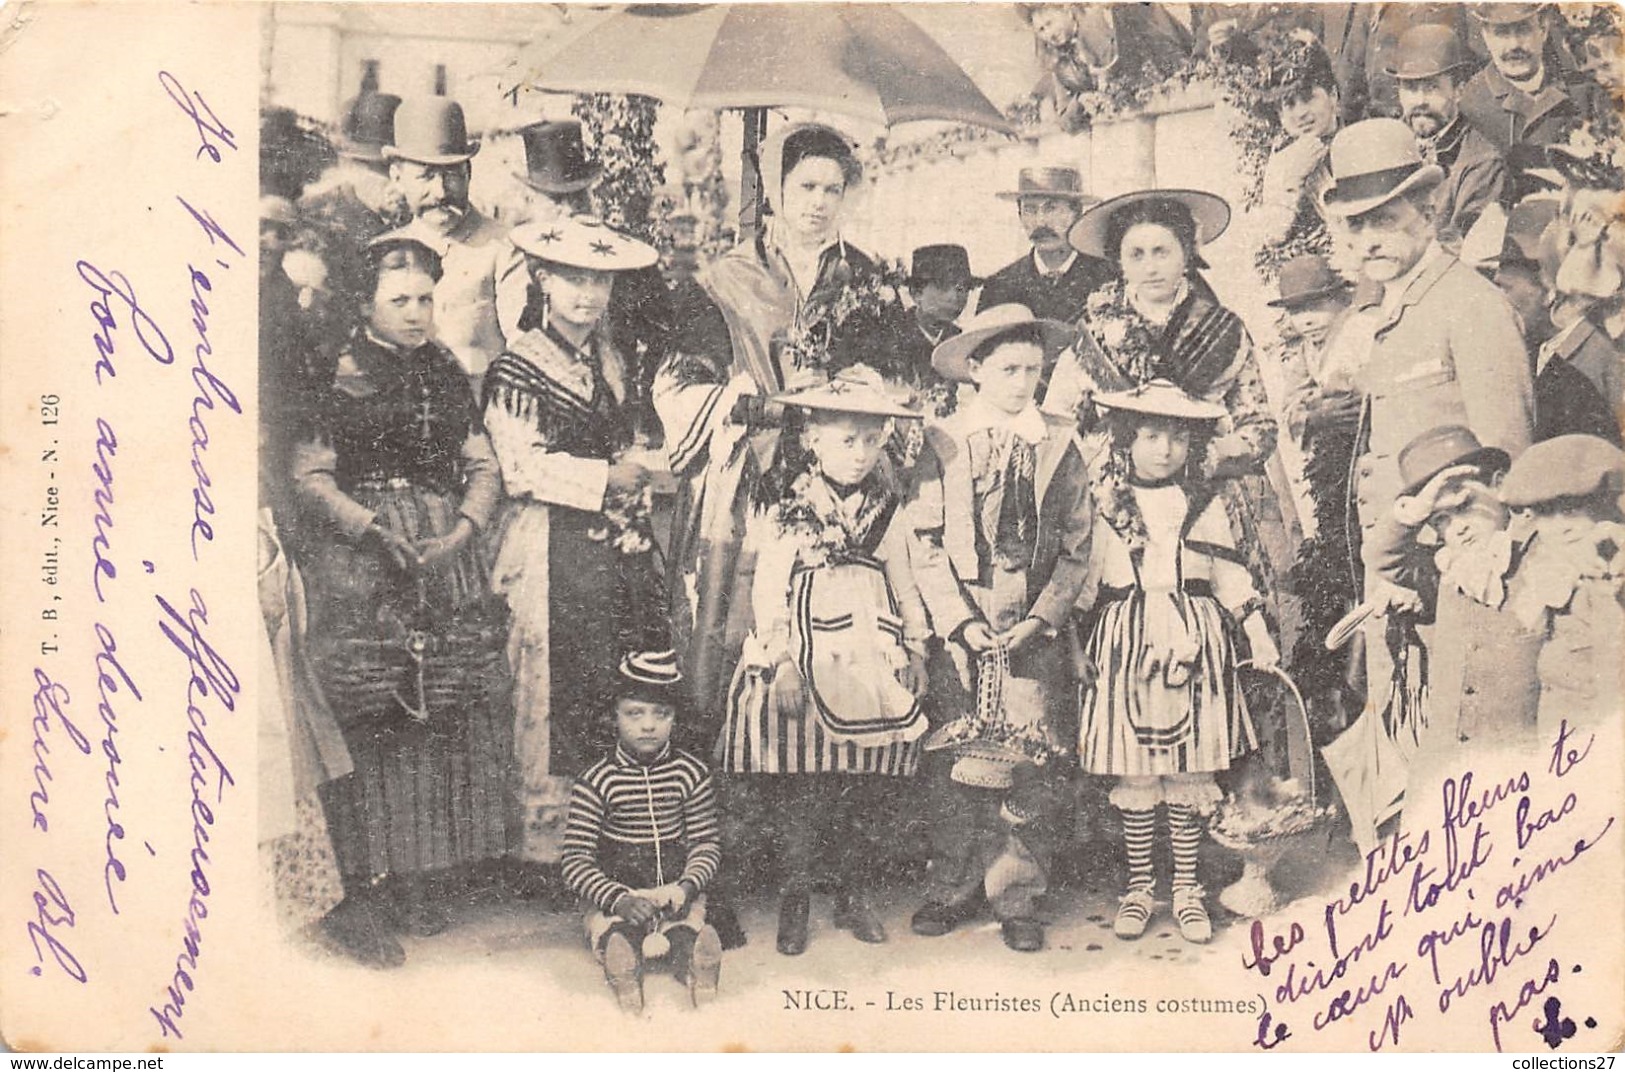 06-NICE- LES FLEURISTES- (ANCIENS COSTUMES) - Life In The Old Town (Vieux Nice)